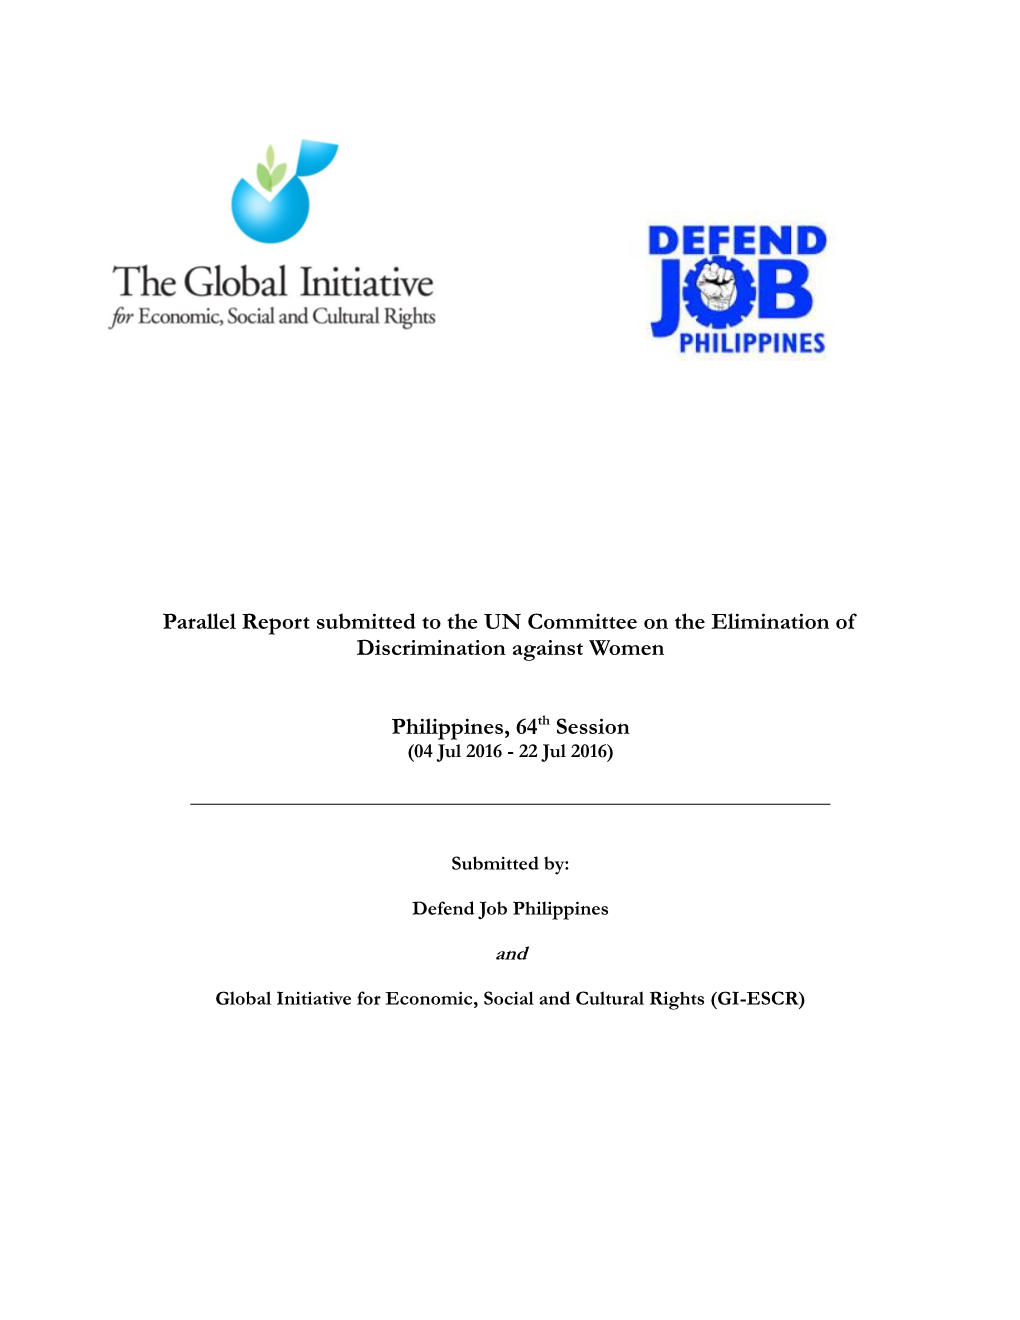 Parallel Report Submitted to the UN Committee on the Elimination of Discrimination Against Women